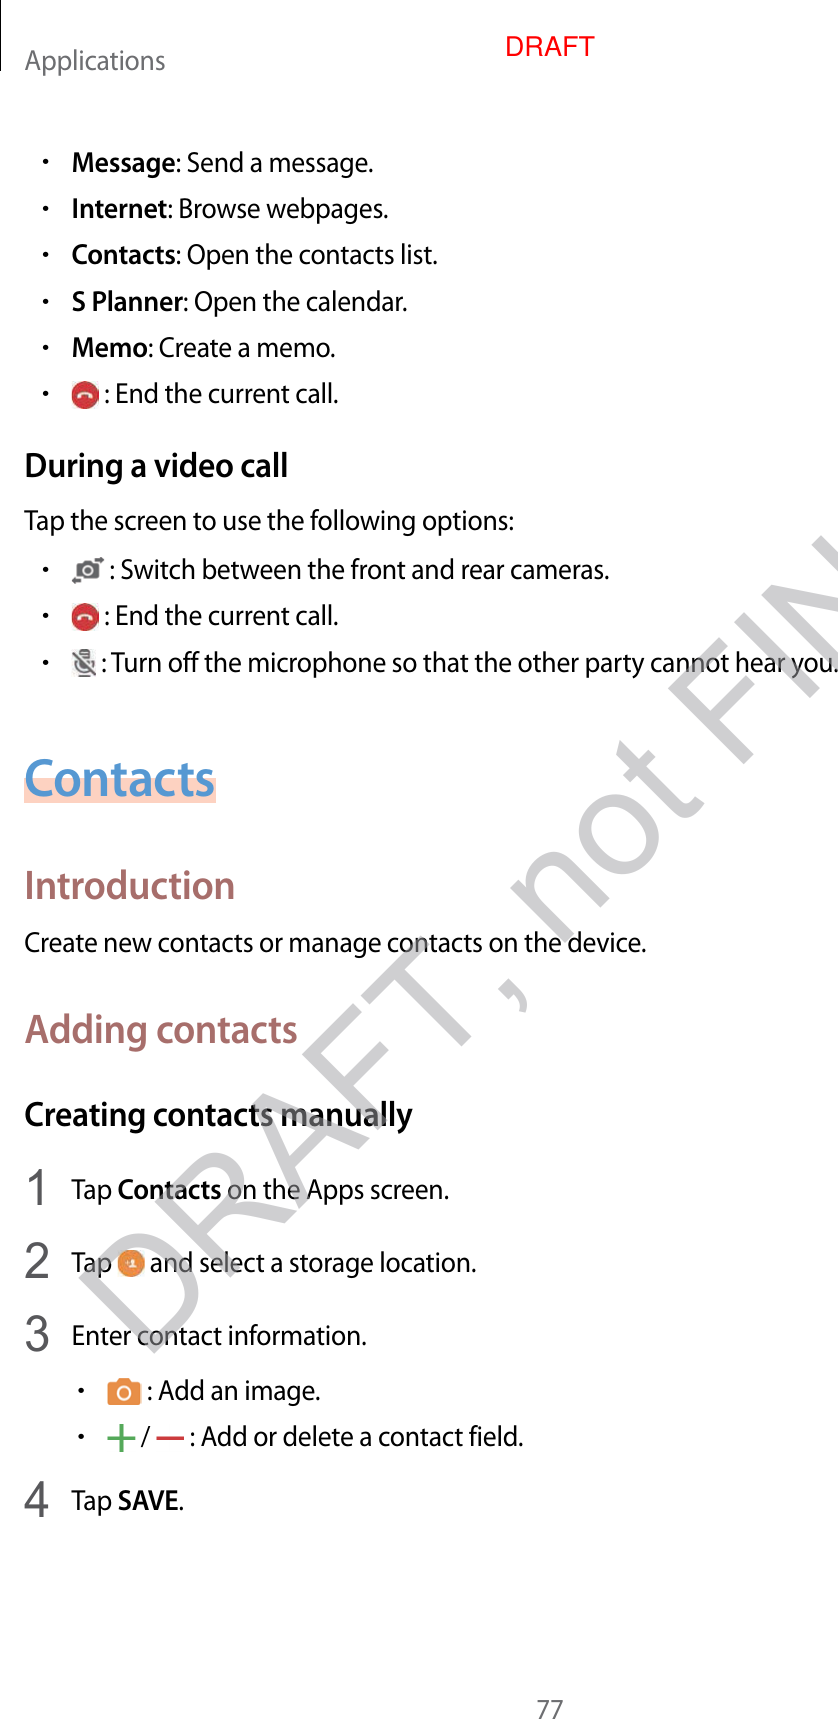 Applications77•Message: Send a message.•Internet: Brow se w ebpages .•Contacts: Open the contacts list.•S Planner: Open the calendar.•Memo: Creat e a memo.• : End the current call .During a video callTap the screen to use the f ollo wing options:• : Switch between the fr on t and r ear cameras .• : End the current call .• : Turn off the microphone so tha t the other party cannot hear you.ContactsIntroductionCreat e new c ontacts or manage contacts on the device.A dding con tactsCrea ting c ontacts manually1  Tap Contacts on the Apps screen.2  Tap   and select a storage location.3  Enter con tact information.• : Add an image .• /   : Add or delet e a con tact field.4  Tap SAVE.DRAFT, not FINALDRAFT